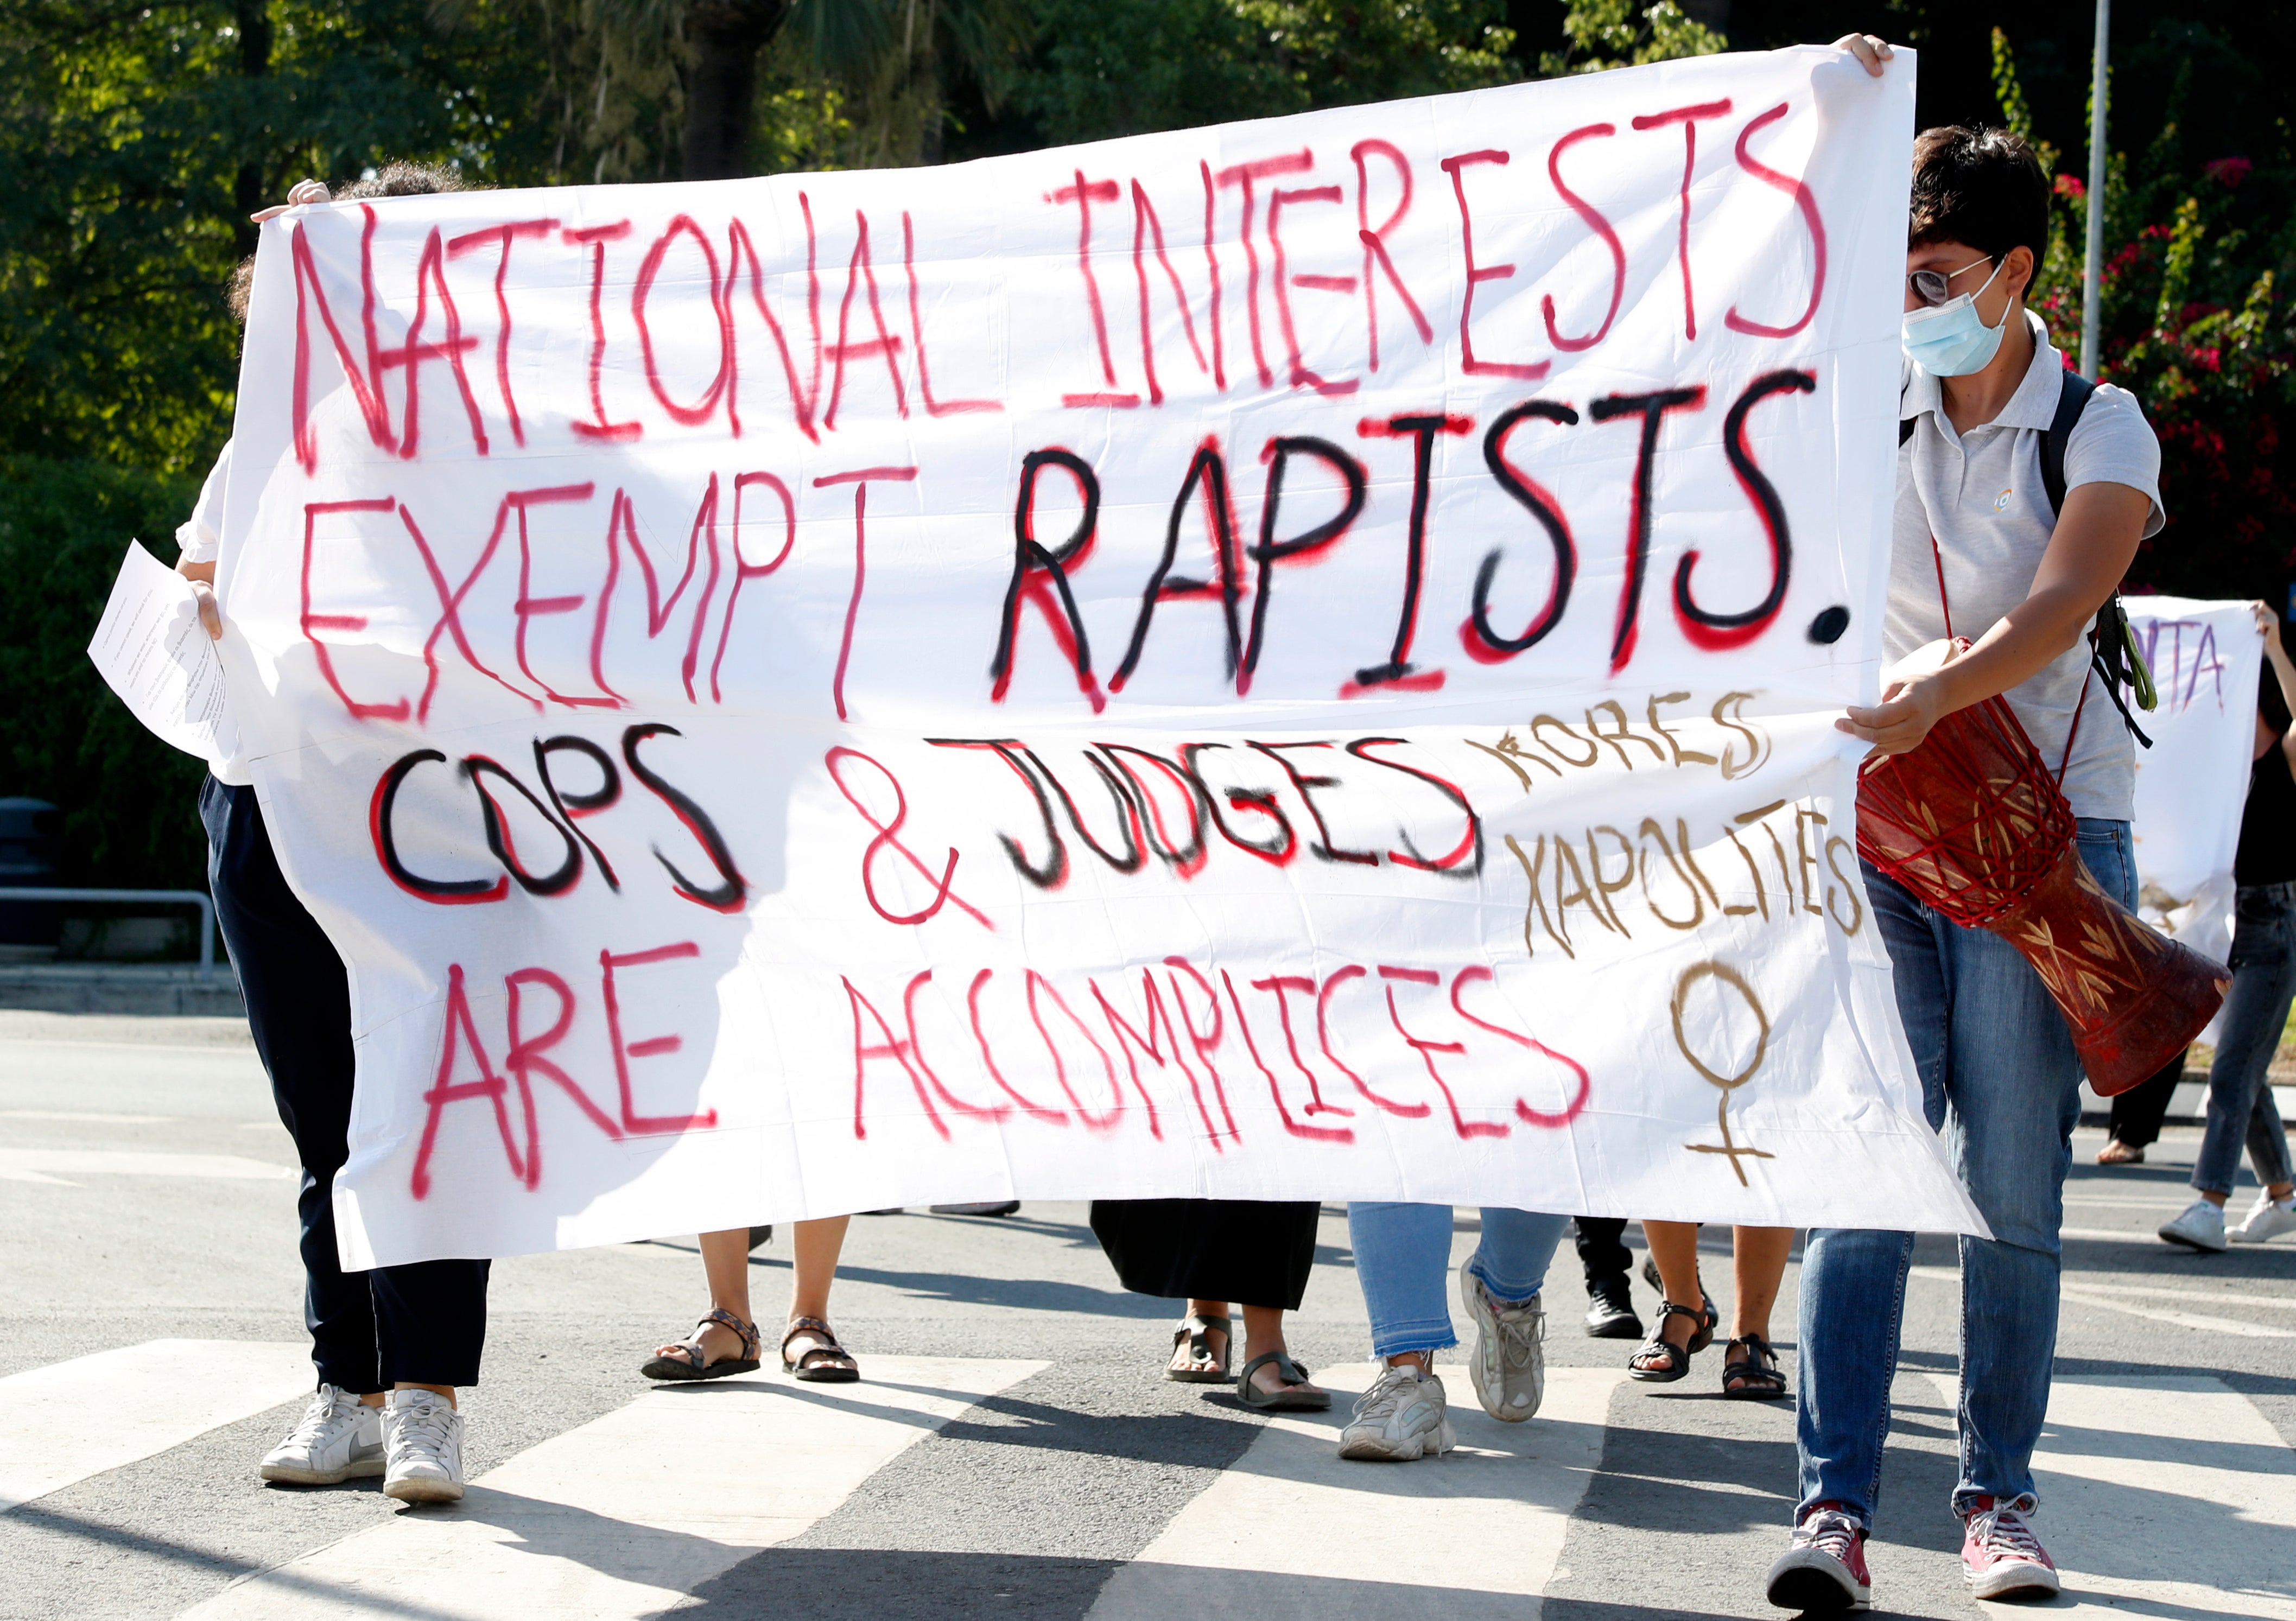 Protesters hold a banner in support of a British woman who appealed her conviction for making false claims that she was gang raped at a resort on the island in 2019